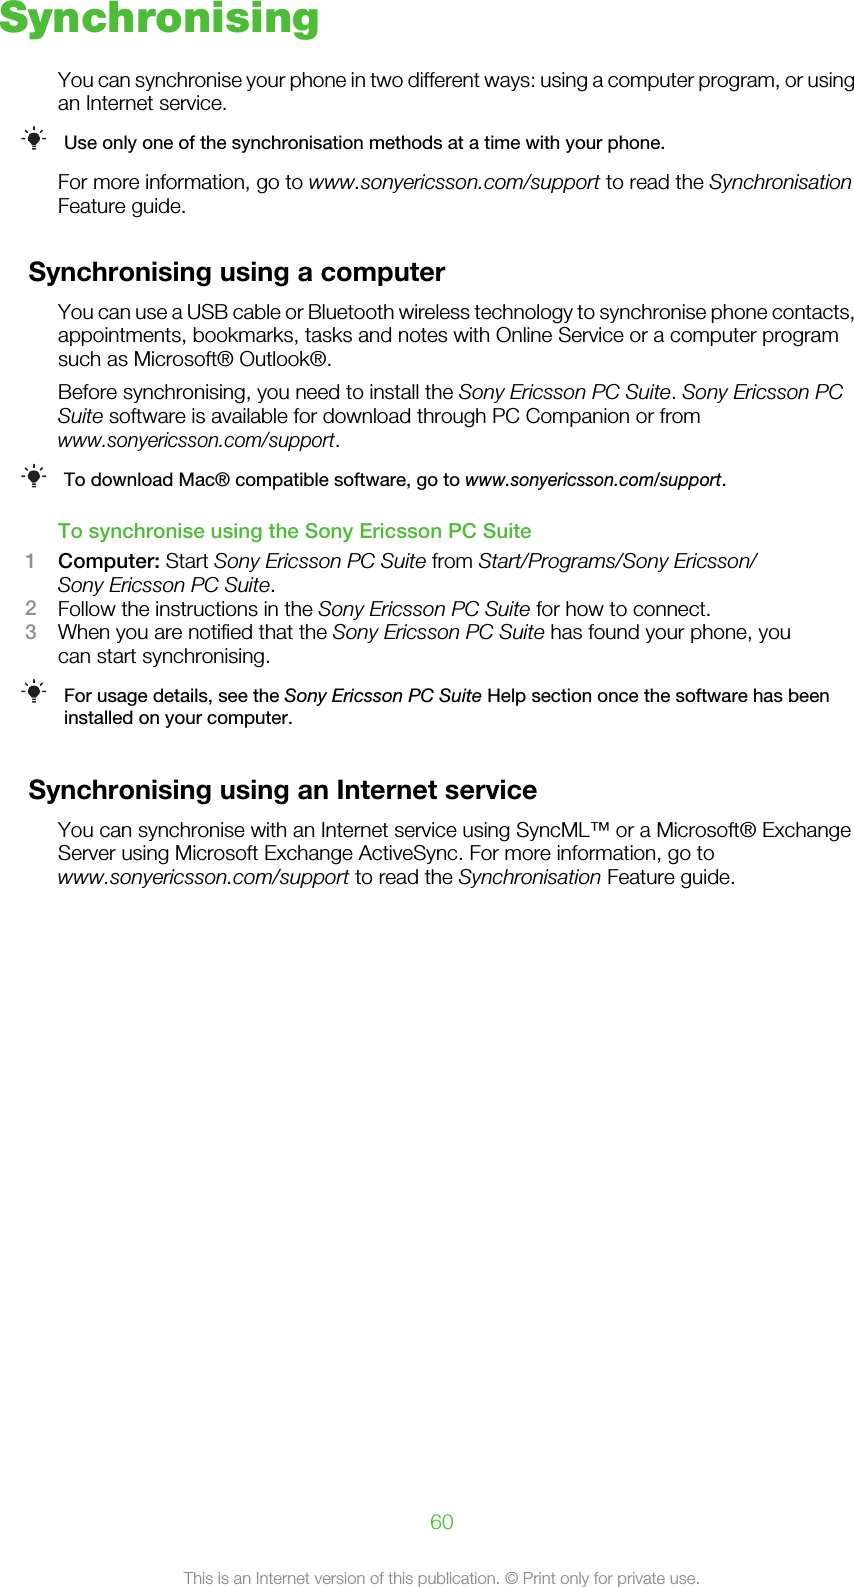 SynchronisingYou can synchronise your phone in two different ways: using a computer program, or usingan Internet service.Use only one of the synchronisation methods at a time with your phone.For more information, go to www.sonyericsson.com/support to read the SynchronisationFeature guide.Synchronising using a computerYou can use a USB cable or Bluetooth wireless technology to synchronise phone contacts,appointments, bookmarks, tasks and notes with Online Service or a computer programsuch as Microsoft® Outlook®.Before synchronising, you need to install the Sony Ericsson PC Suite. Sony Ericsson PCSuite software is available for download through PC Companion or fromwww.sonyericsson.com/support.To download Mac® compatible software, go to www.sonyericsson.com/support.To synchronise using the Sony Ericsson PC Suite1Computer: Start Sony Ericsson PC Suite from Start/Programs/Sony Ericsson/Sony Ericsson PC Suite.2Follow the instructions in the Sony Ericsson PC Suite for how to connect.3When you are notified that the Sony Ericsson PC Suite has found your phone, youcan start synchronising.For usage details, see the Sony Ericsson PC Suite Help section once the software has beeninstalled on your computer.Synchronising using an Internet serviceYou can synchronise with an Internet service using SyncML™ or a Microsoft® ExchangeServer using Microsoft Exchange ActiveSync. For more information, go towww.sonyericsson.com/support to read the Synchronisation Feature guide.60This is an Internet version of this publication. © Print only for private use.